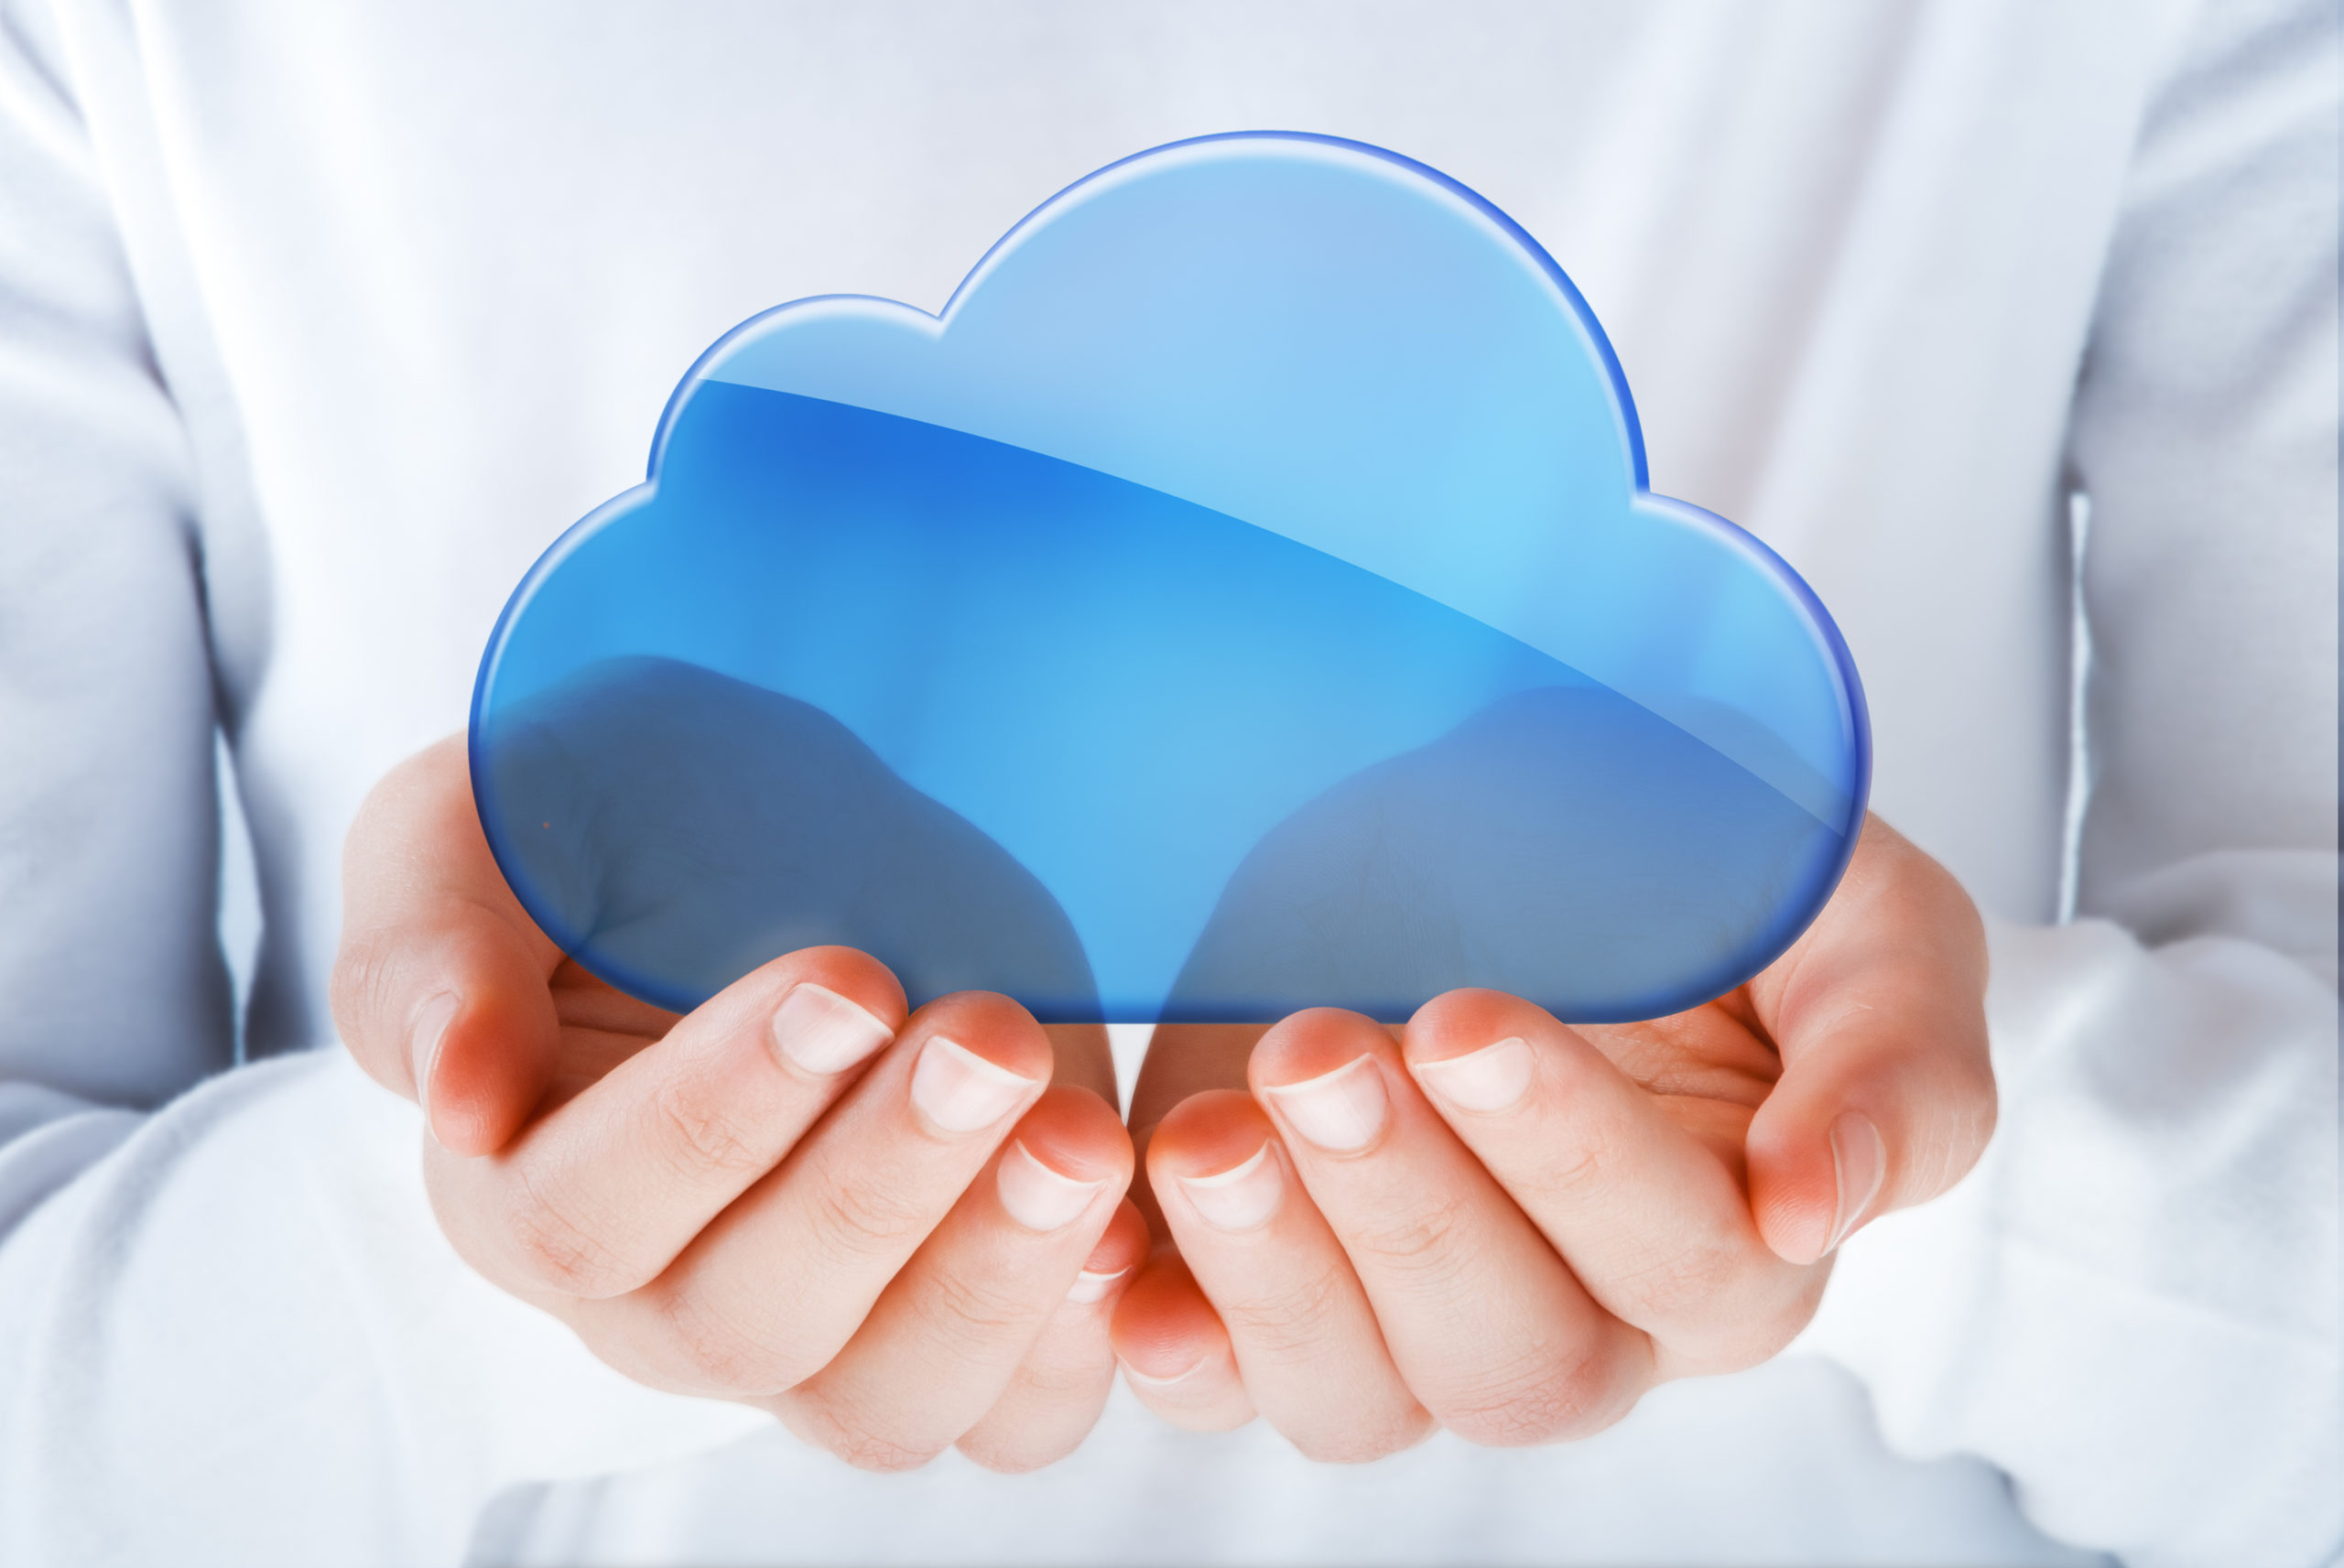 6 Steps for Streamlining Your Cloud Services to Lower Costs